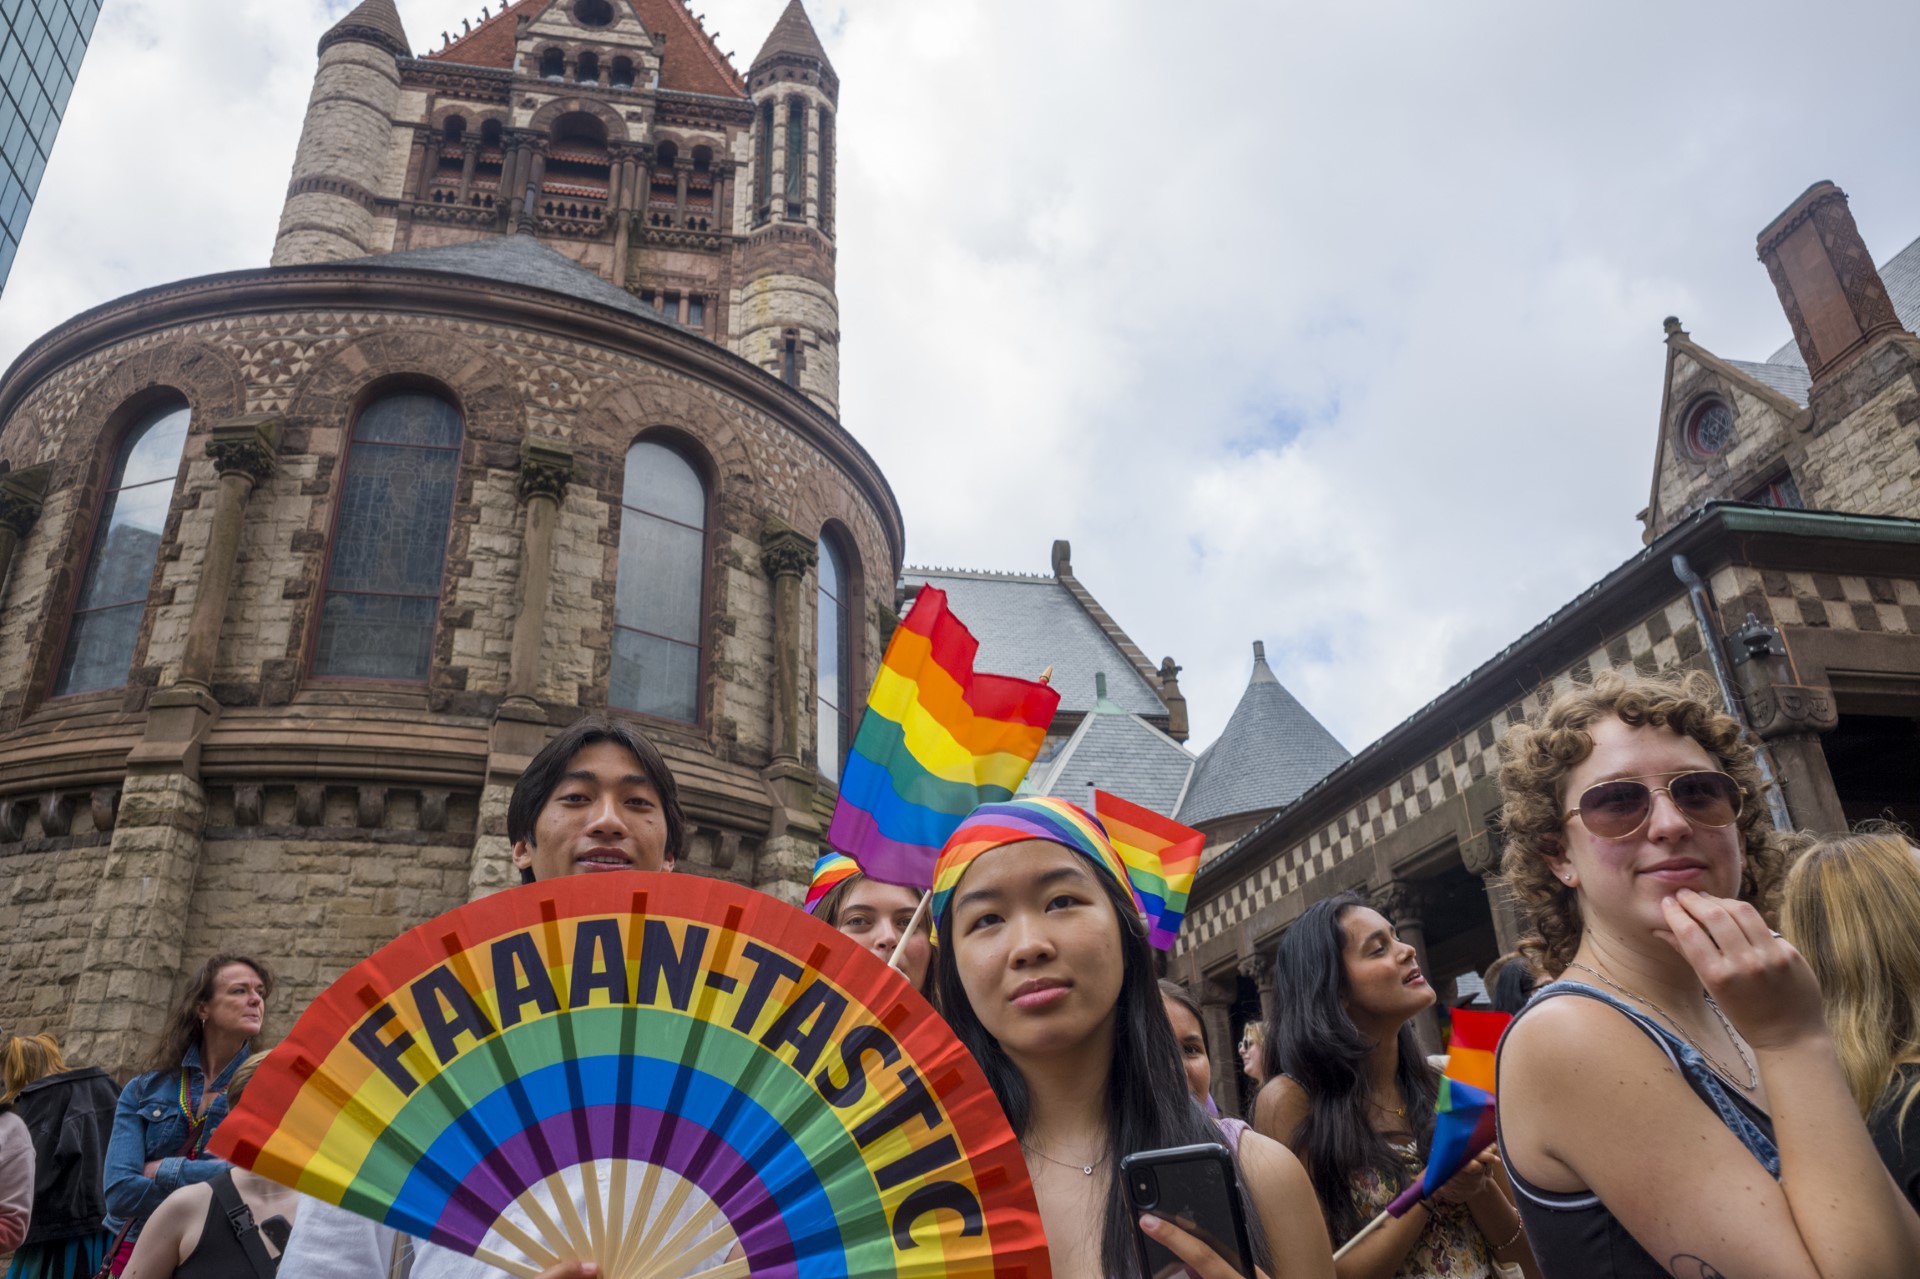 See photos and videos from the Boston Pride parade and festival - The Boston  Globe